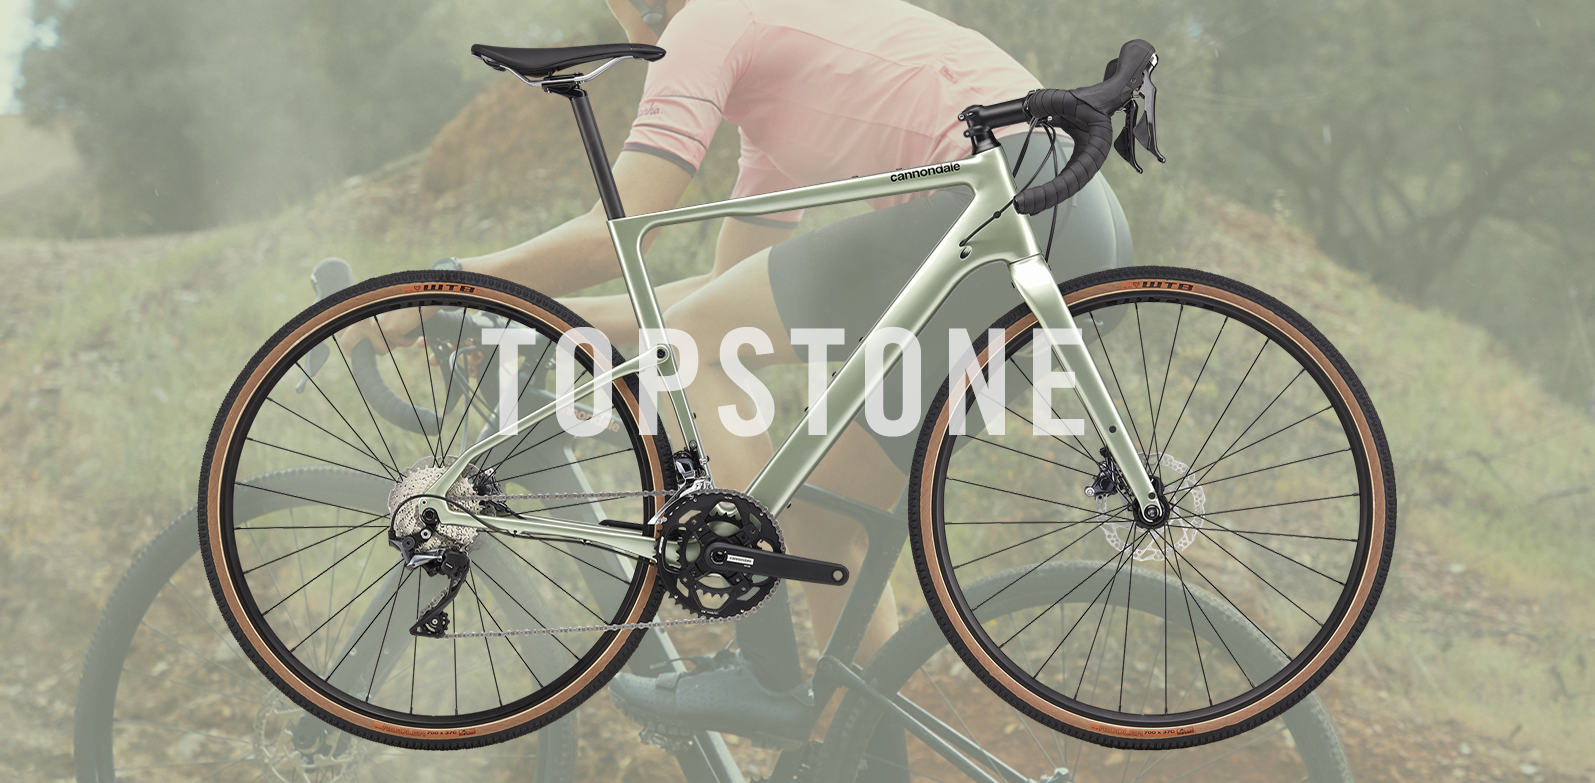 The 2020 Cannondale Topstone Carbon